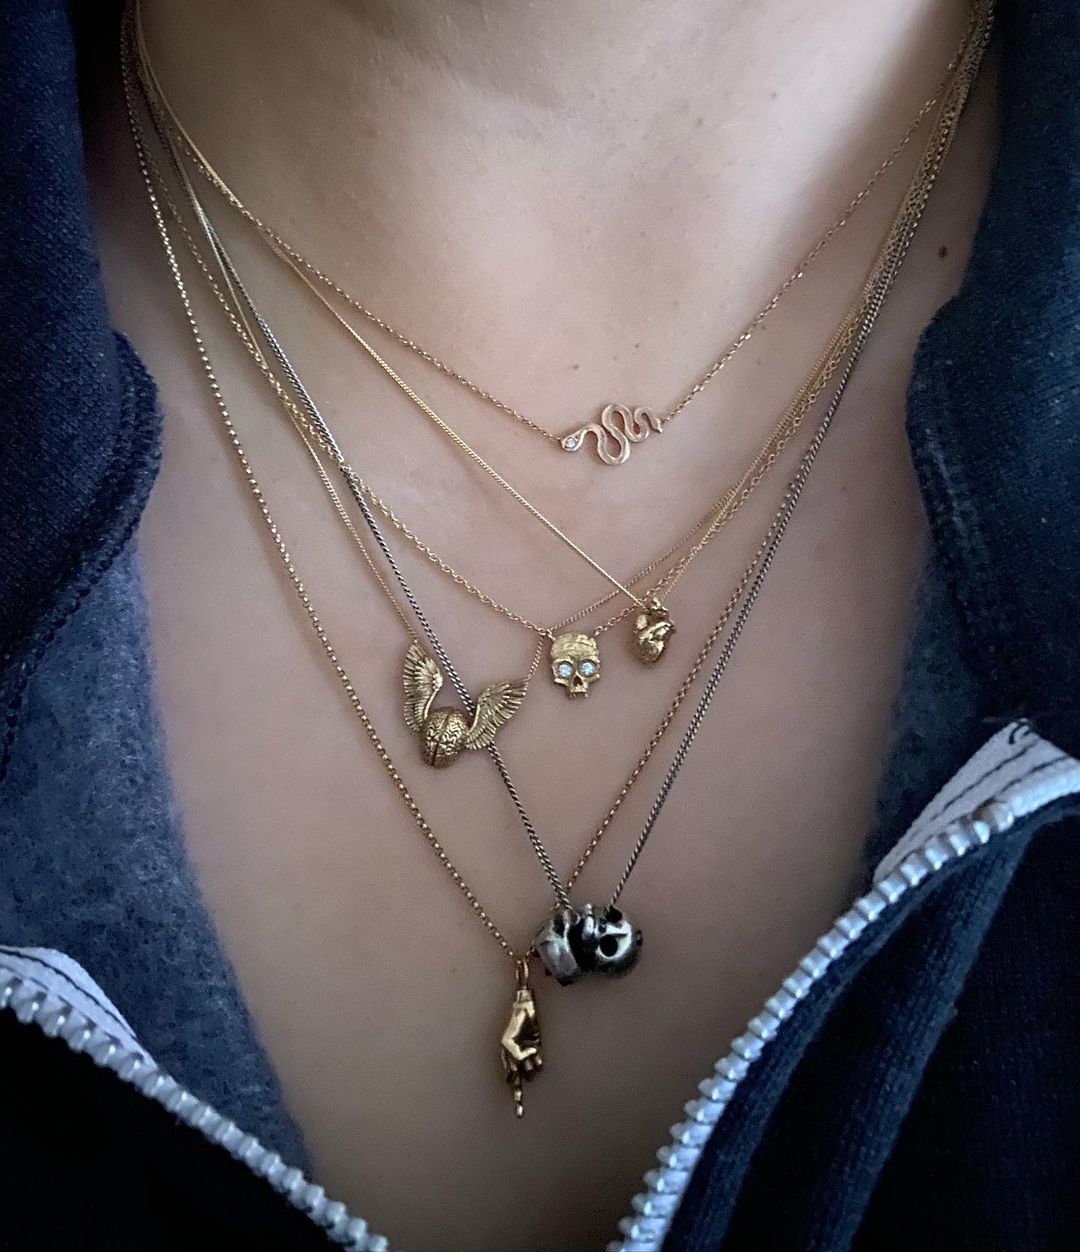 wing'd brain necklace by fiat lux sf in a six necklace stack alongside five other chains, pendants and necklaces